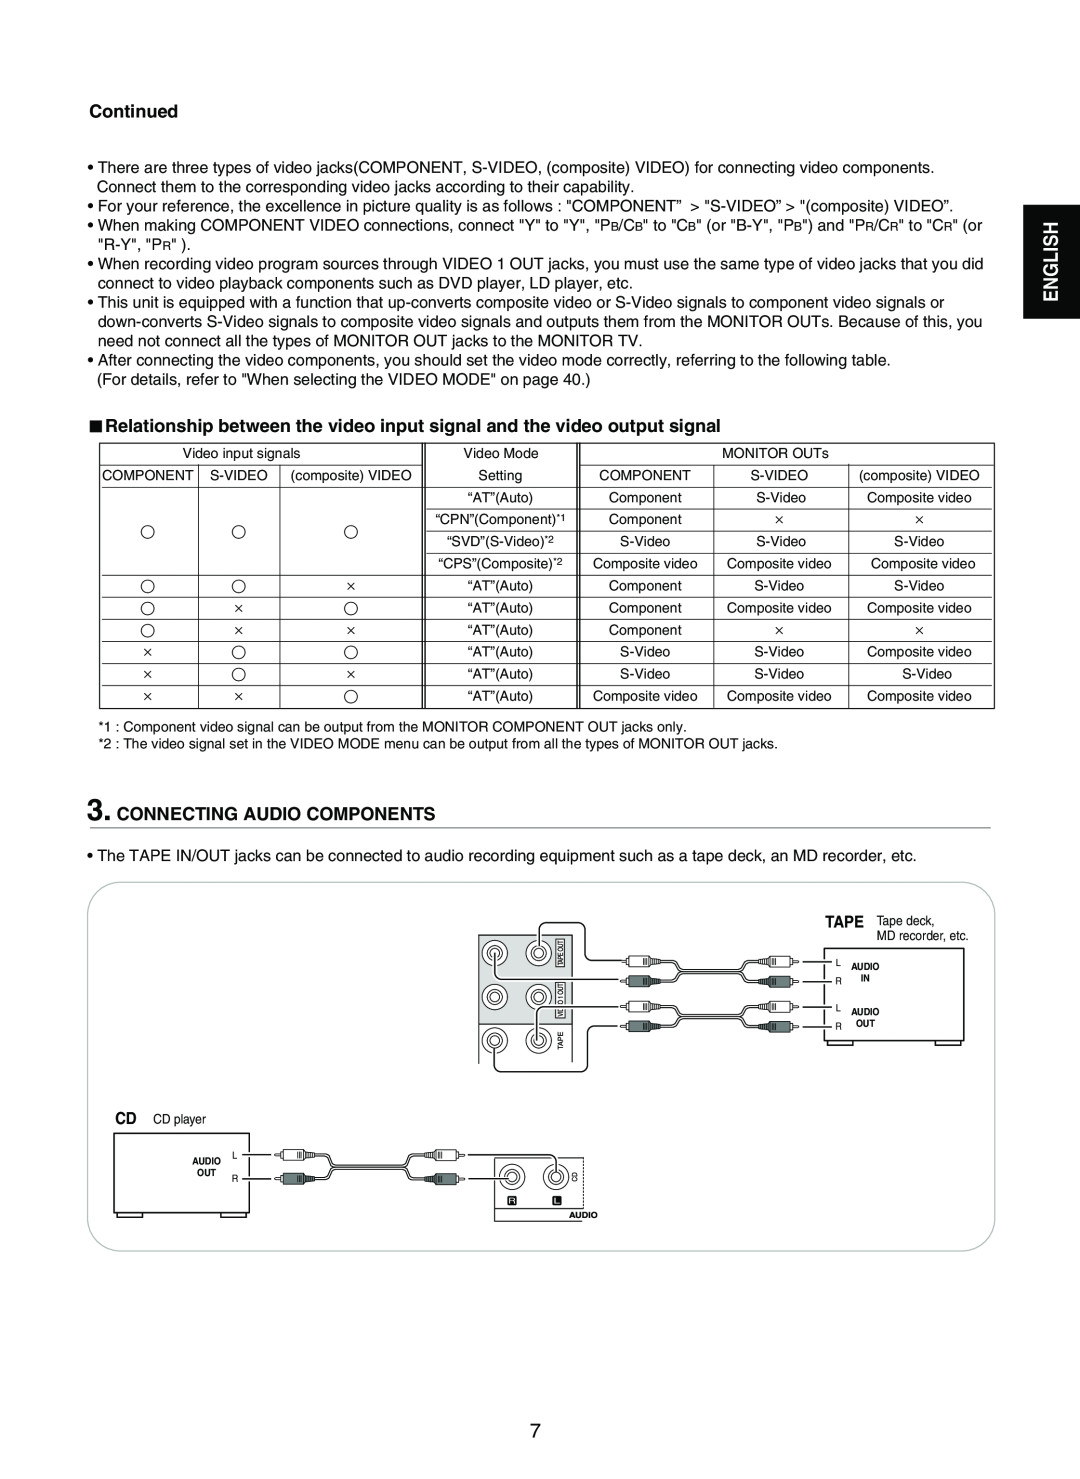 Sherwood RD-7502 manual Continued, Connecting Audio Components, English 